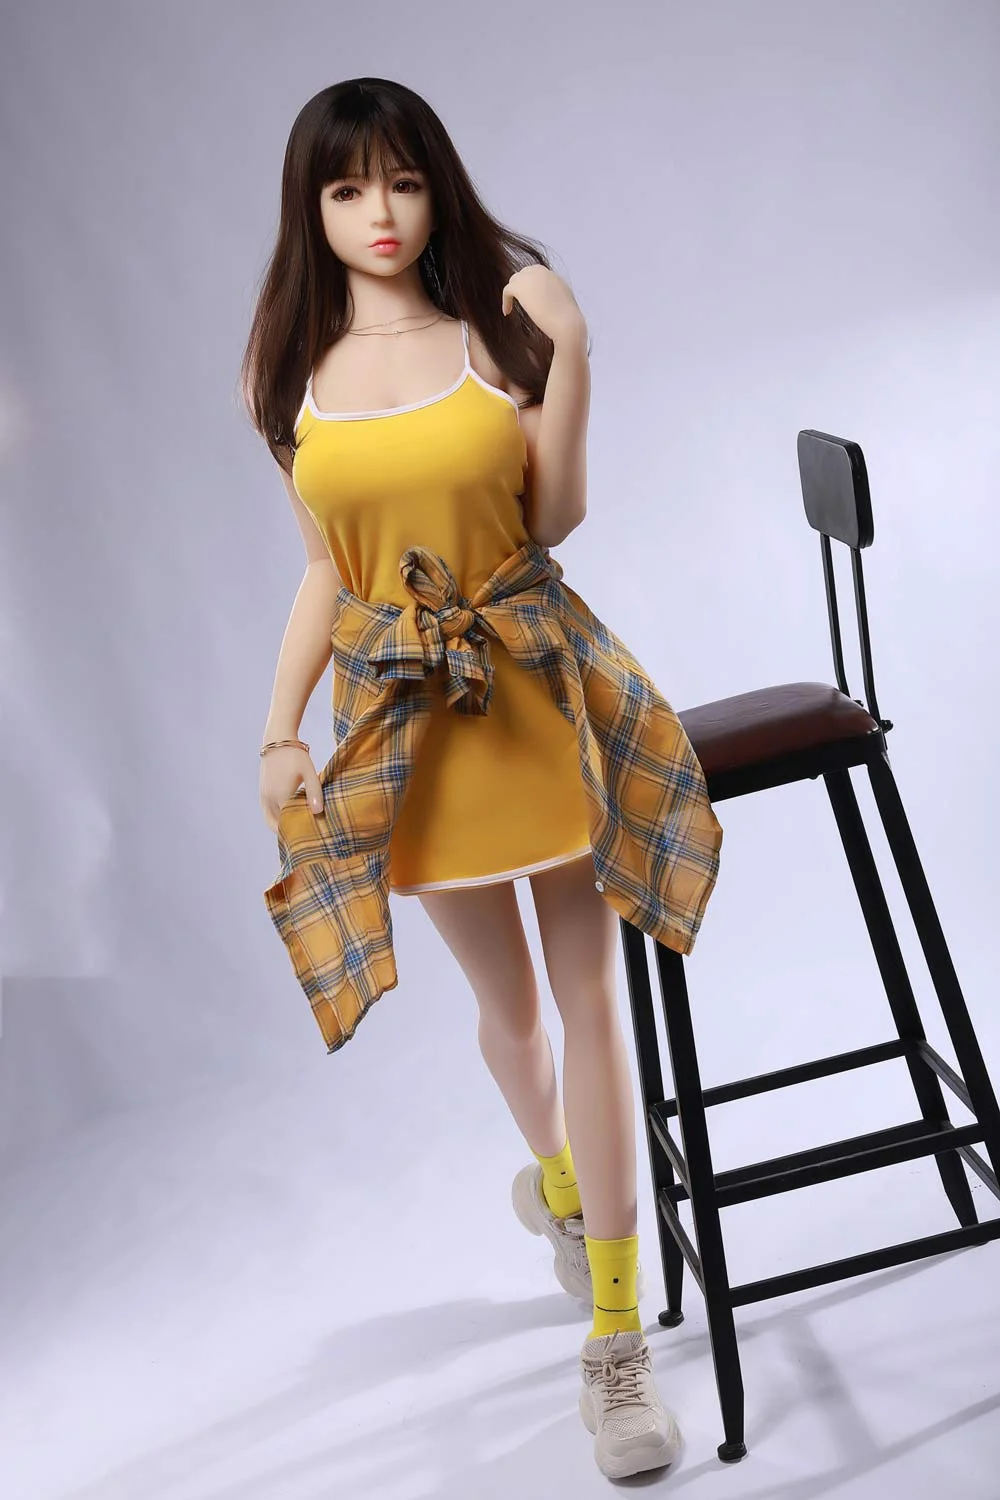 Mini sex doll with shirt tied to waist